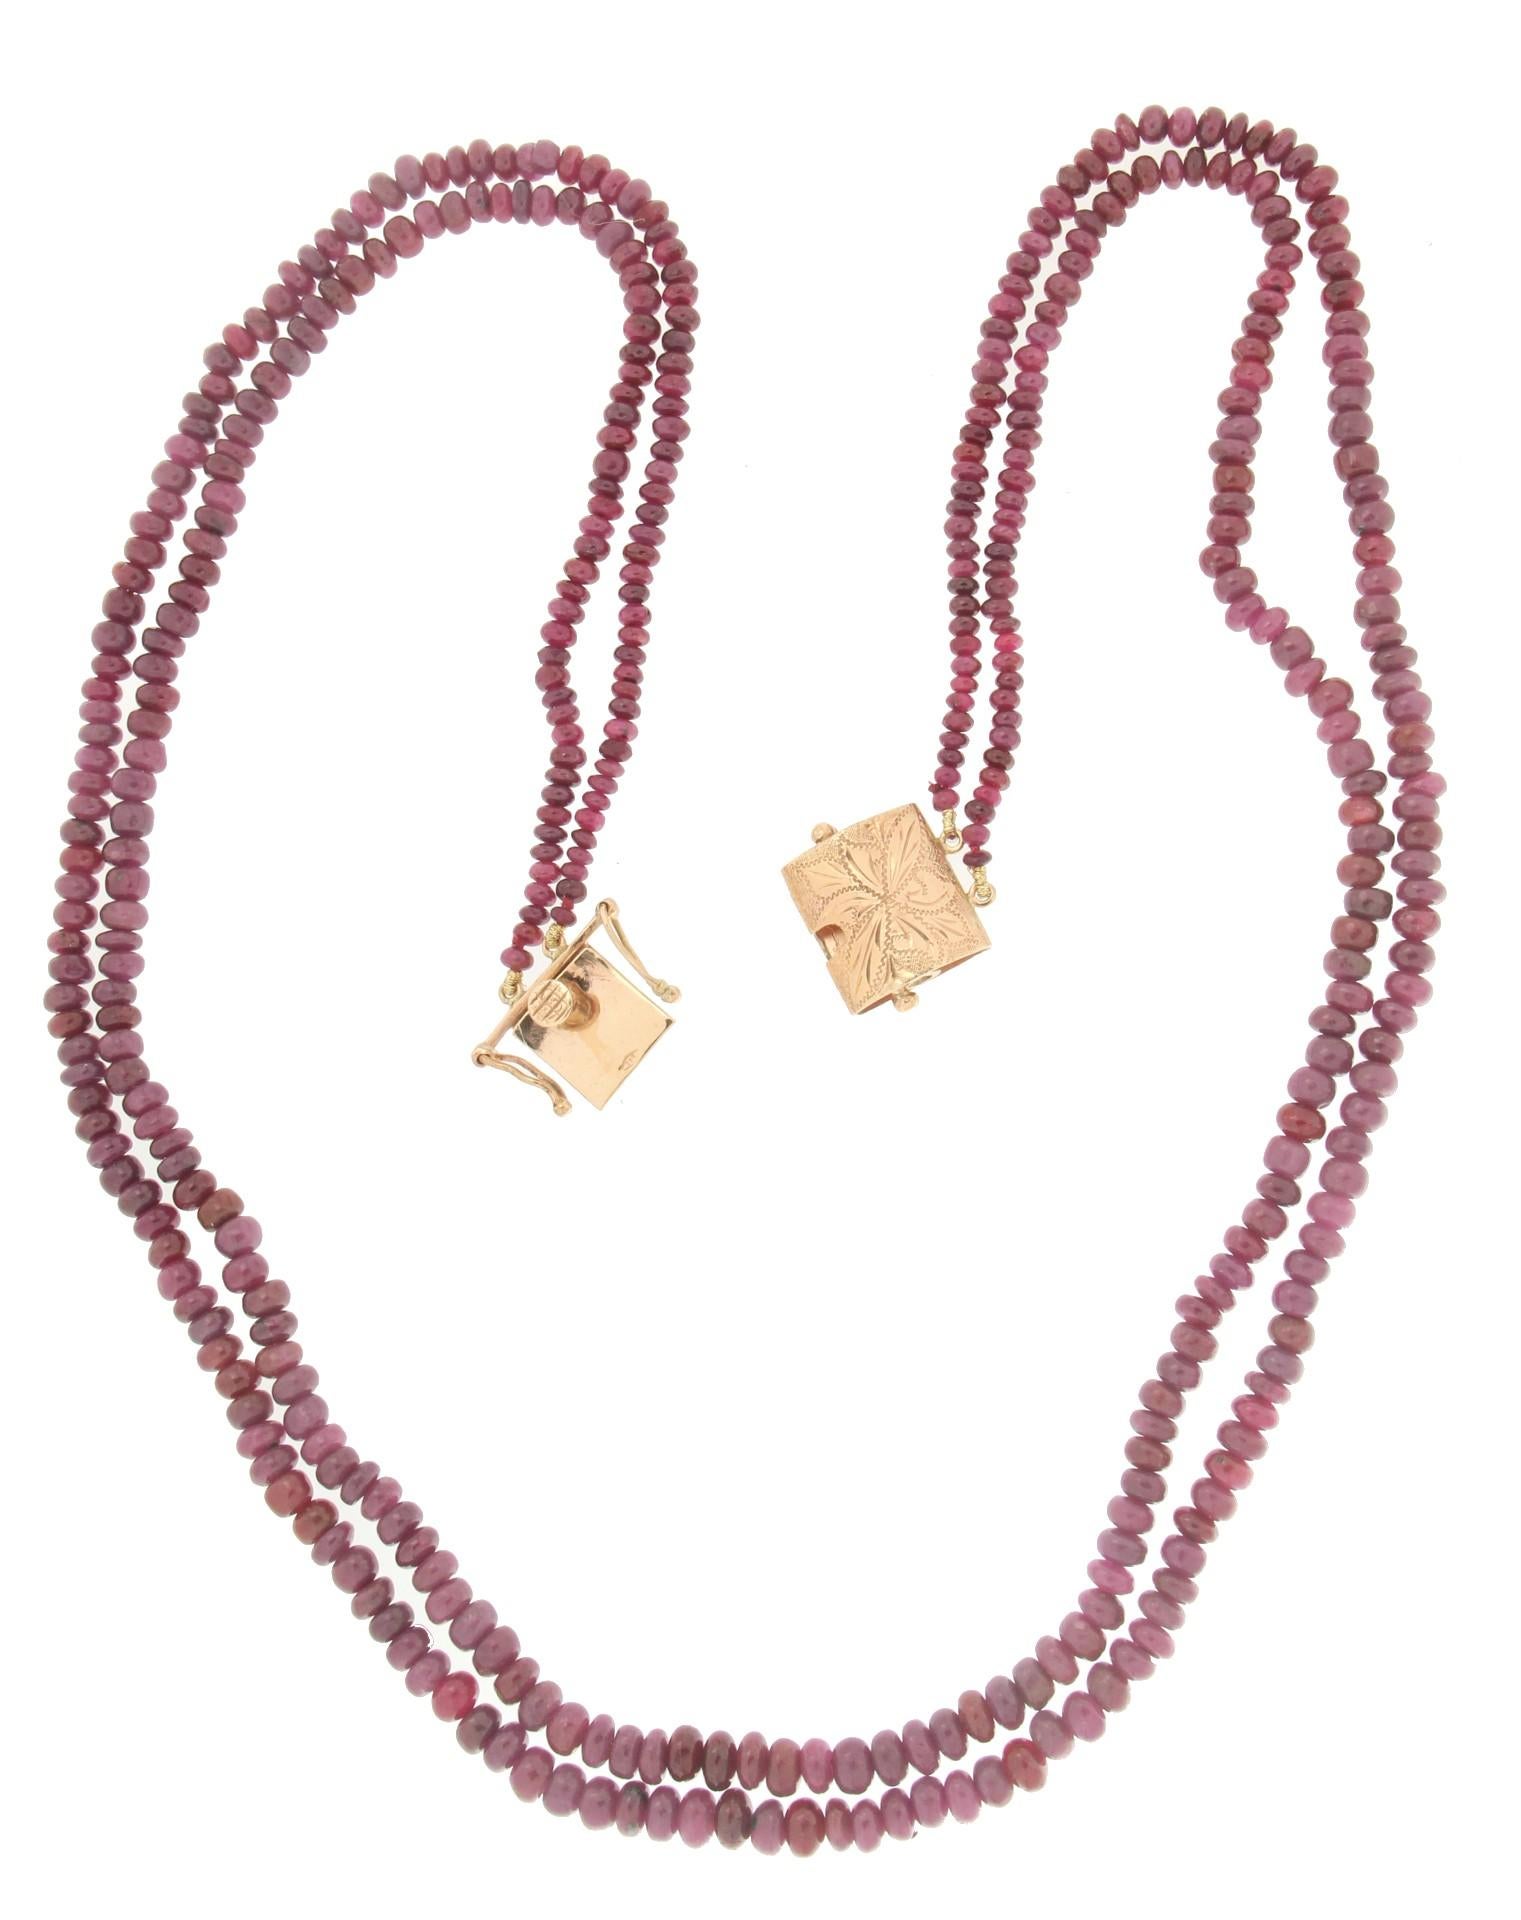 Mixed Cut Handcraft Rubies 14 Karat Yellow Gold Rope Necklace For Sale